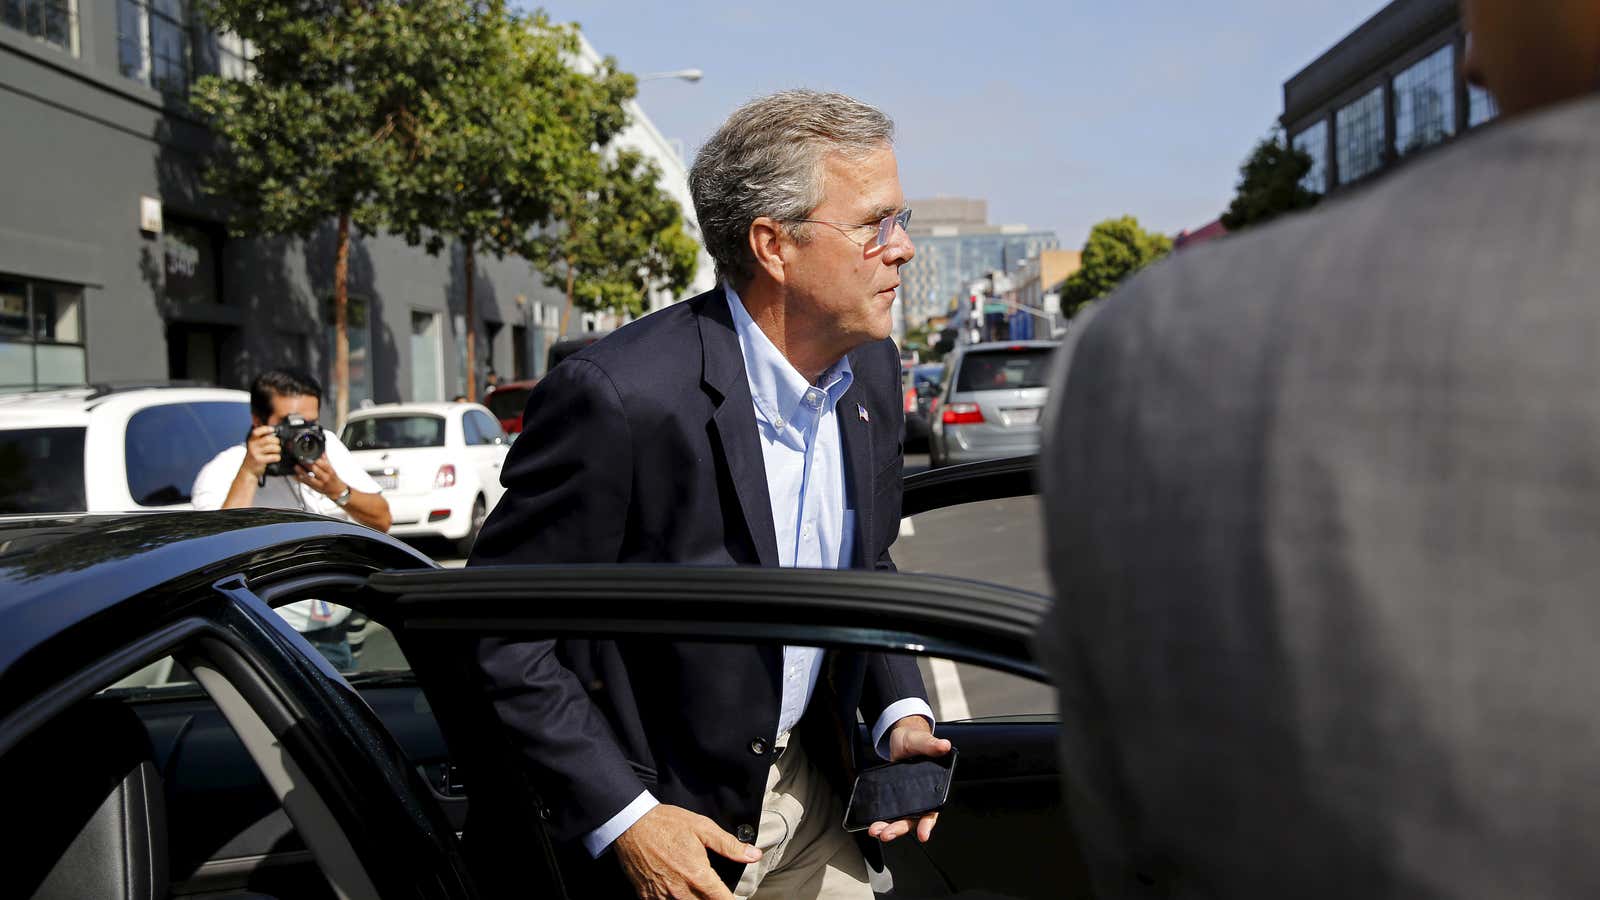 Jeb! Rides! With! Uber!